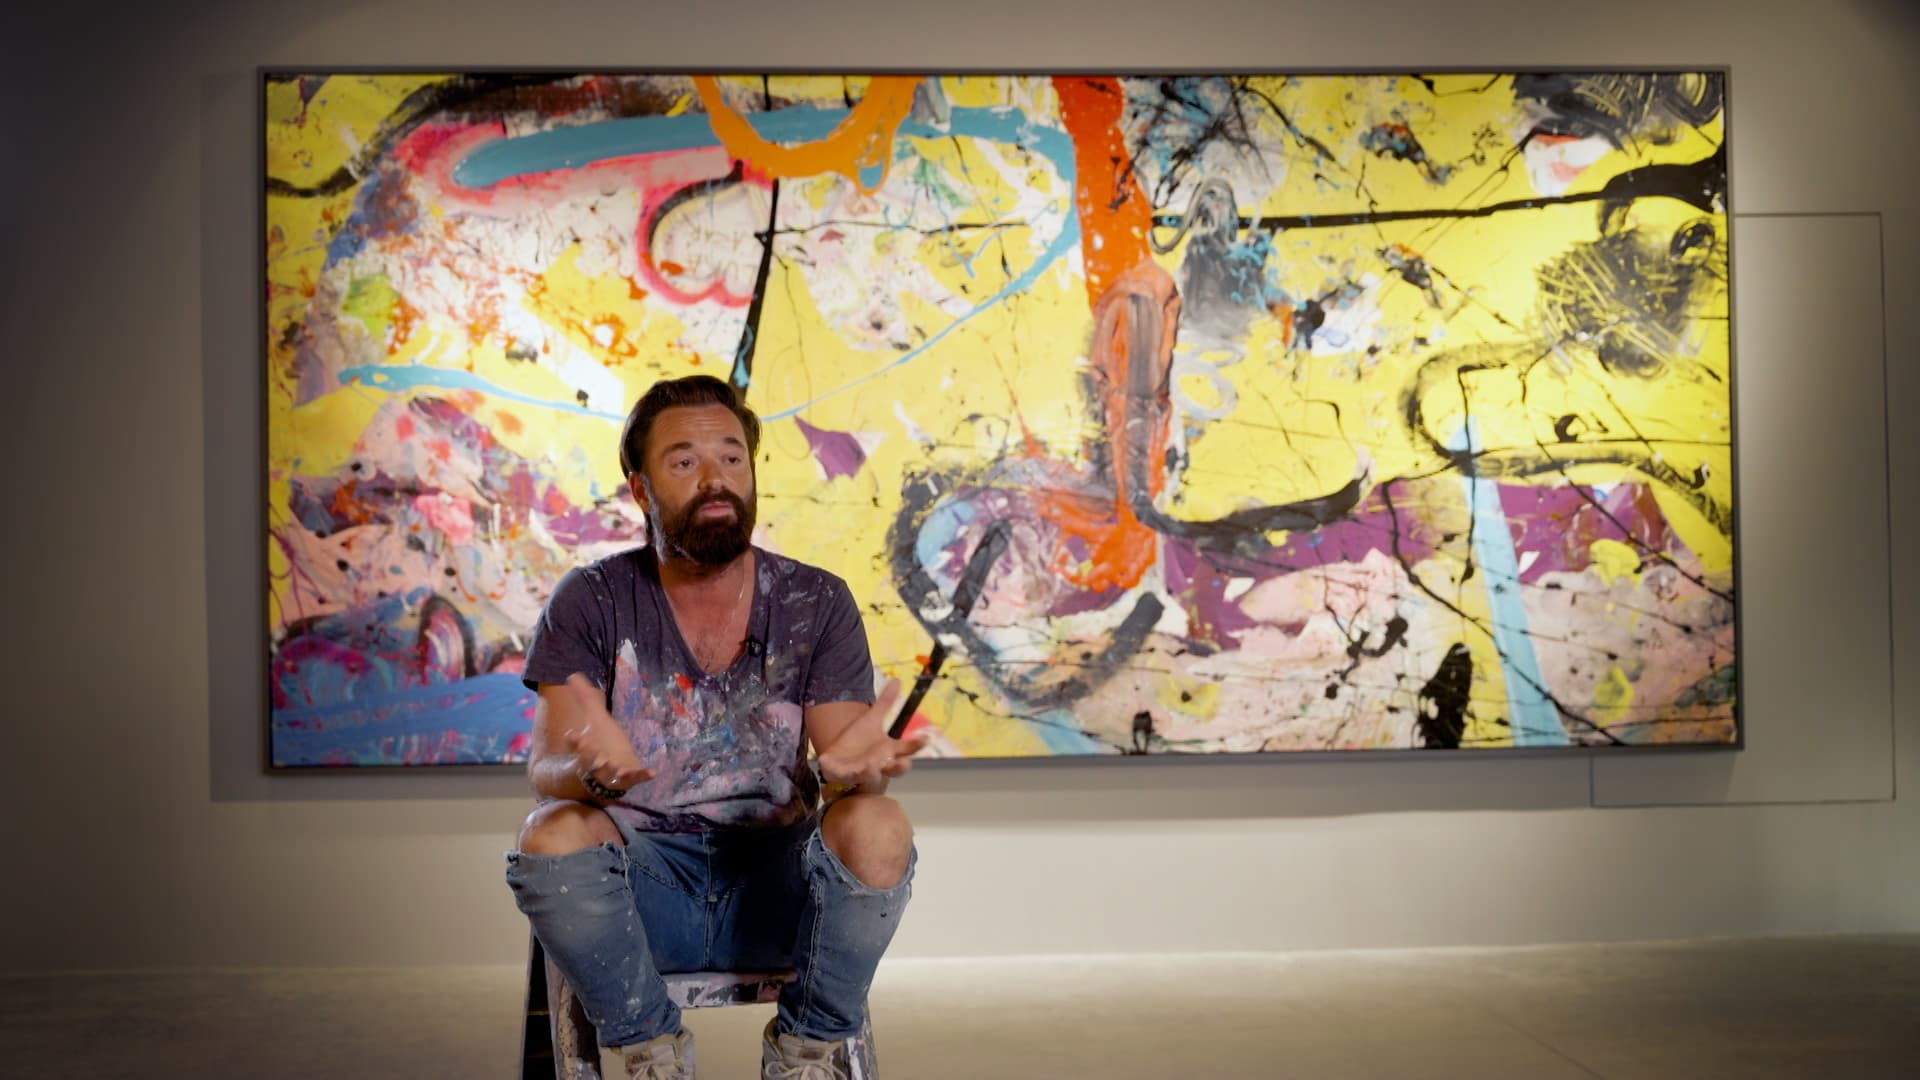 The Dubai artist whose work has sold for millions [Video]